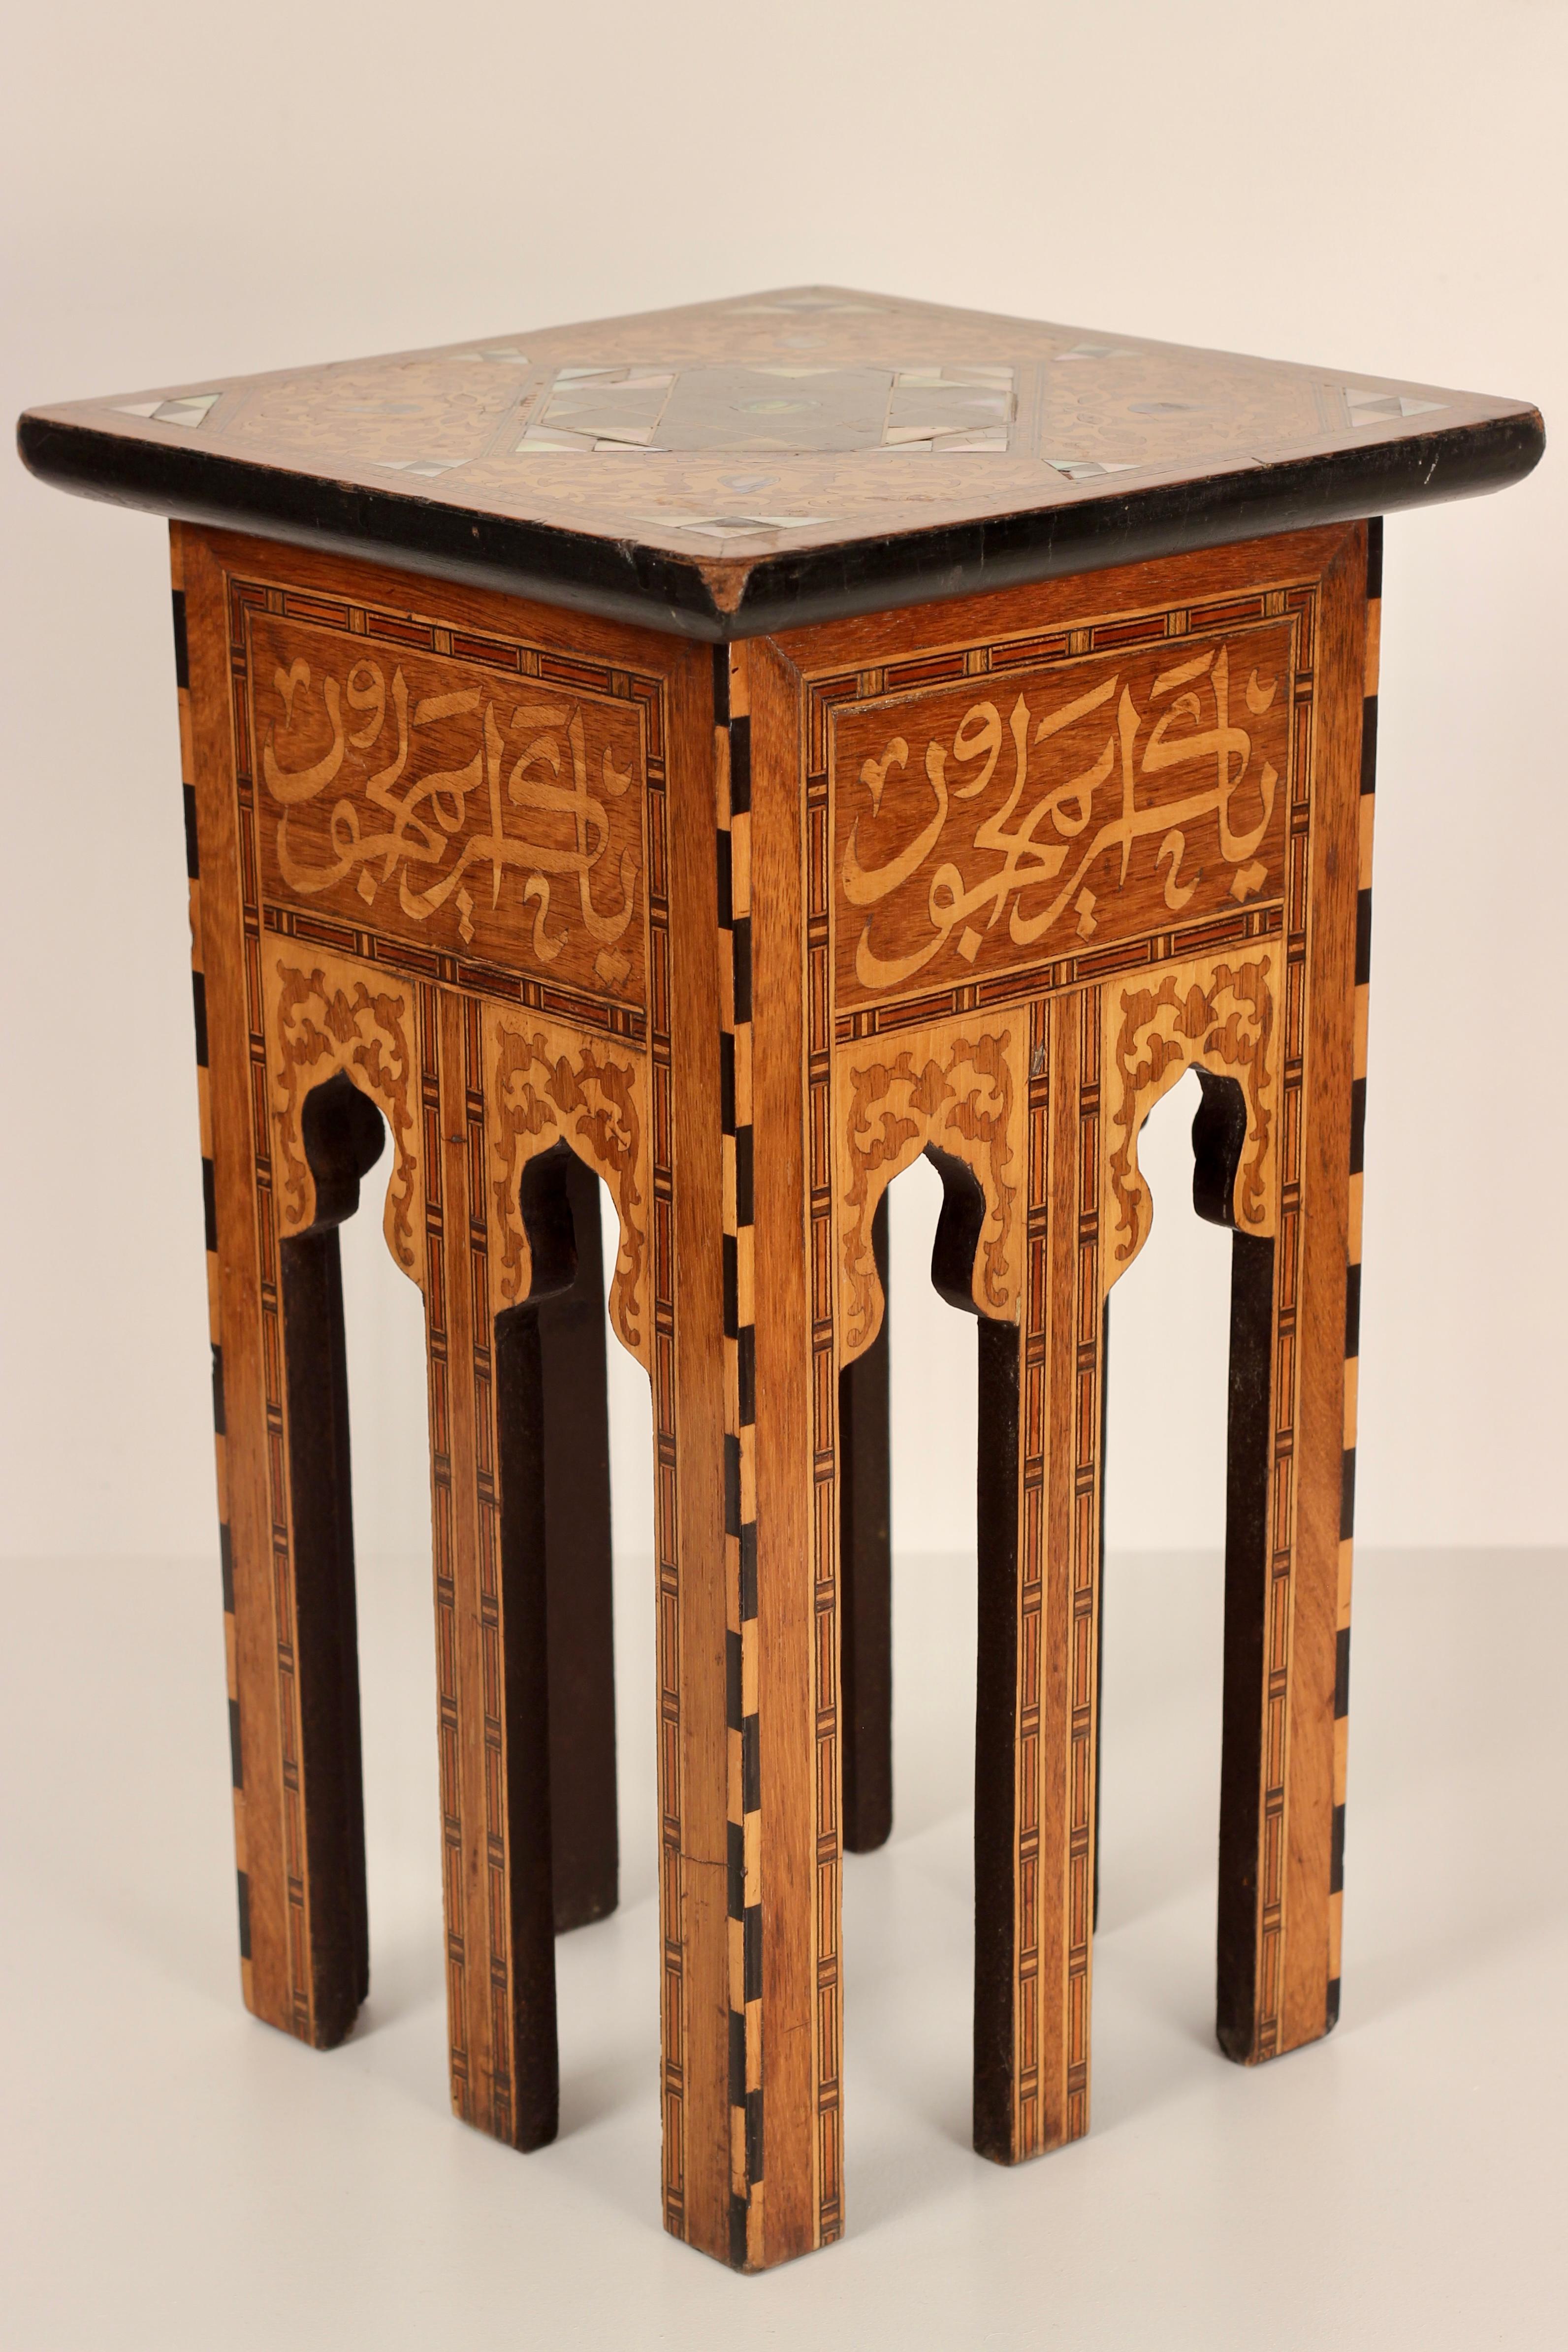 Moorish Boho Chic Style 20th Century Mother of Pearl and Wooden Inlay Liberty & Co Table